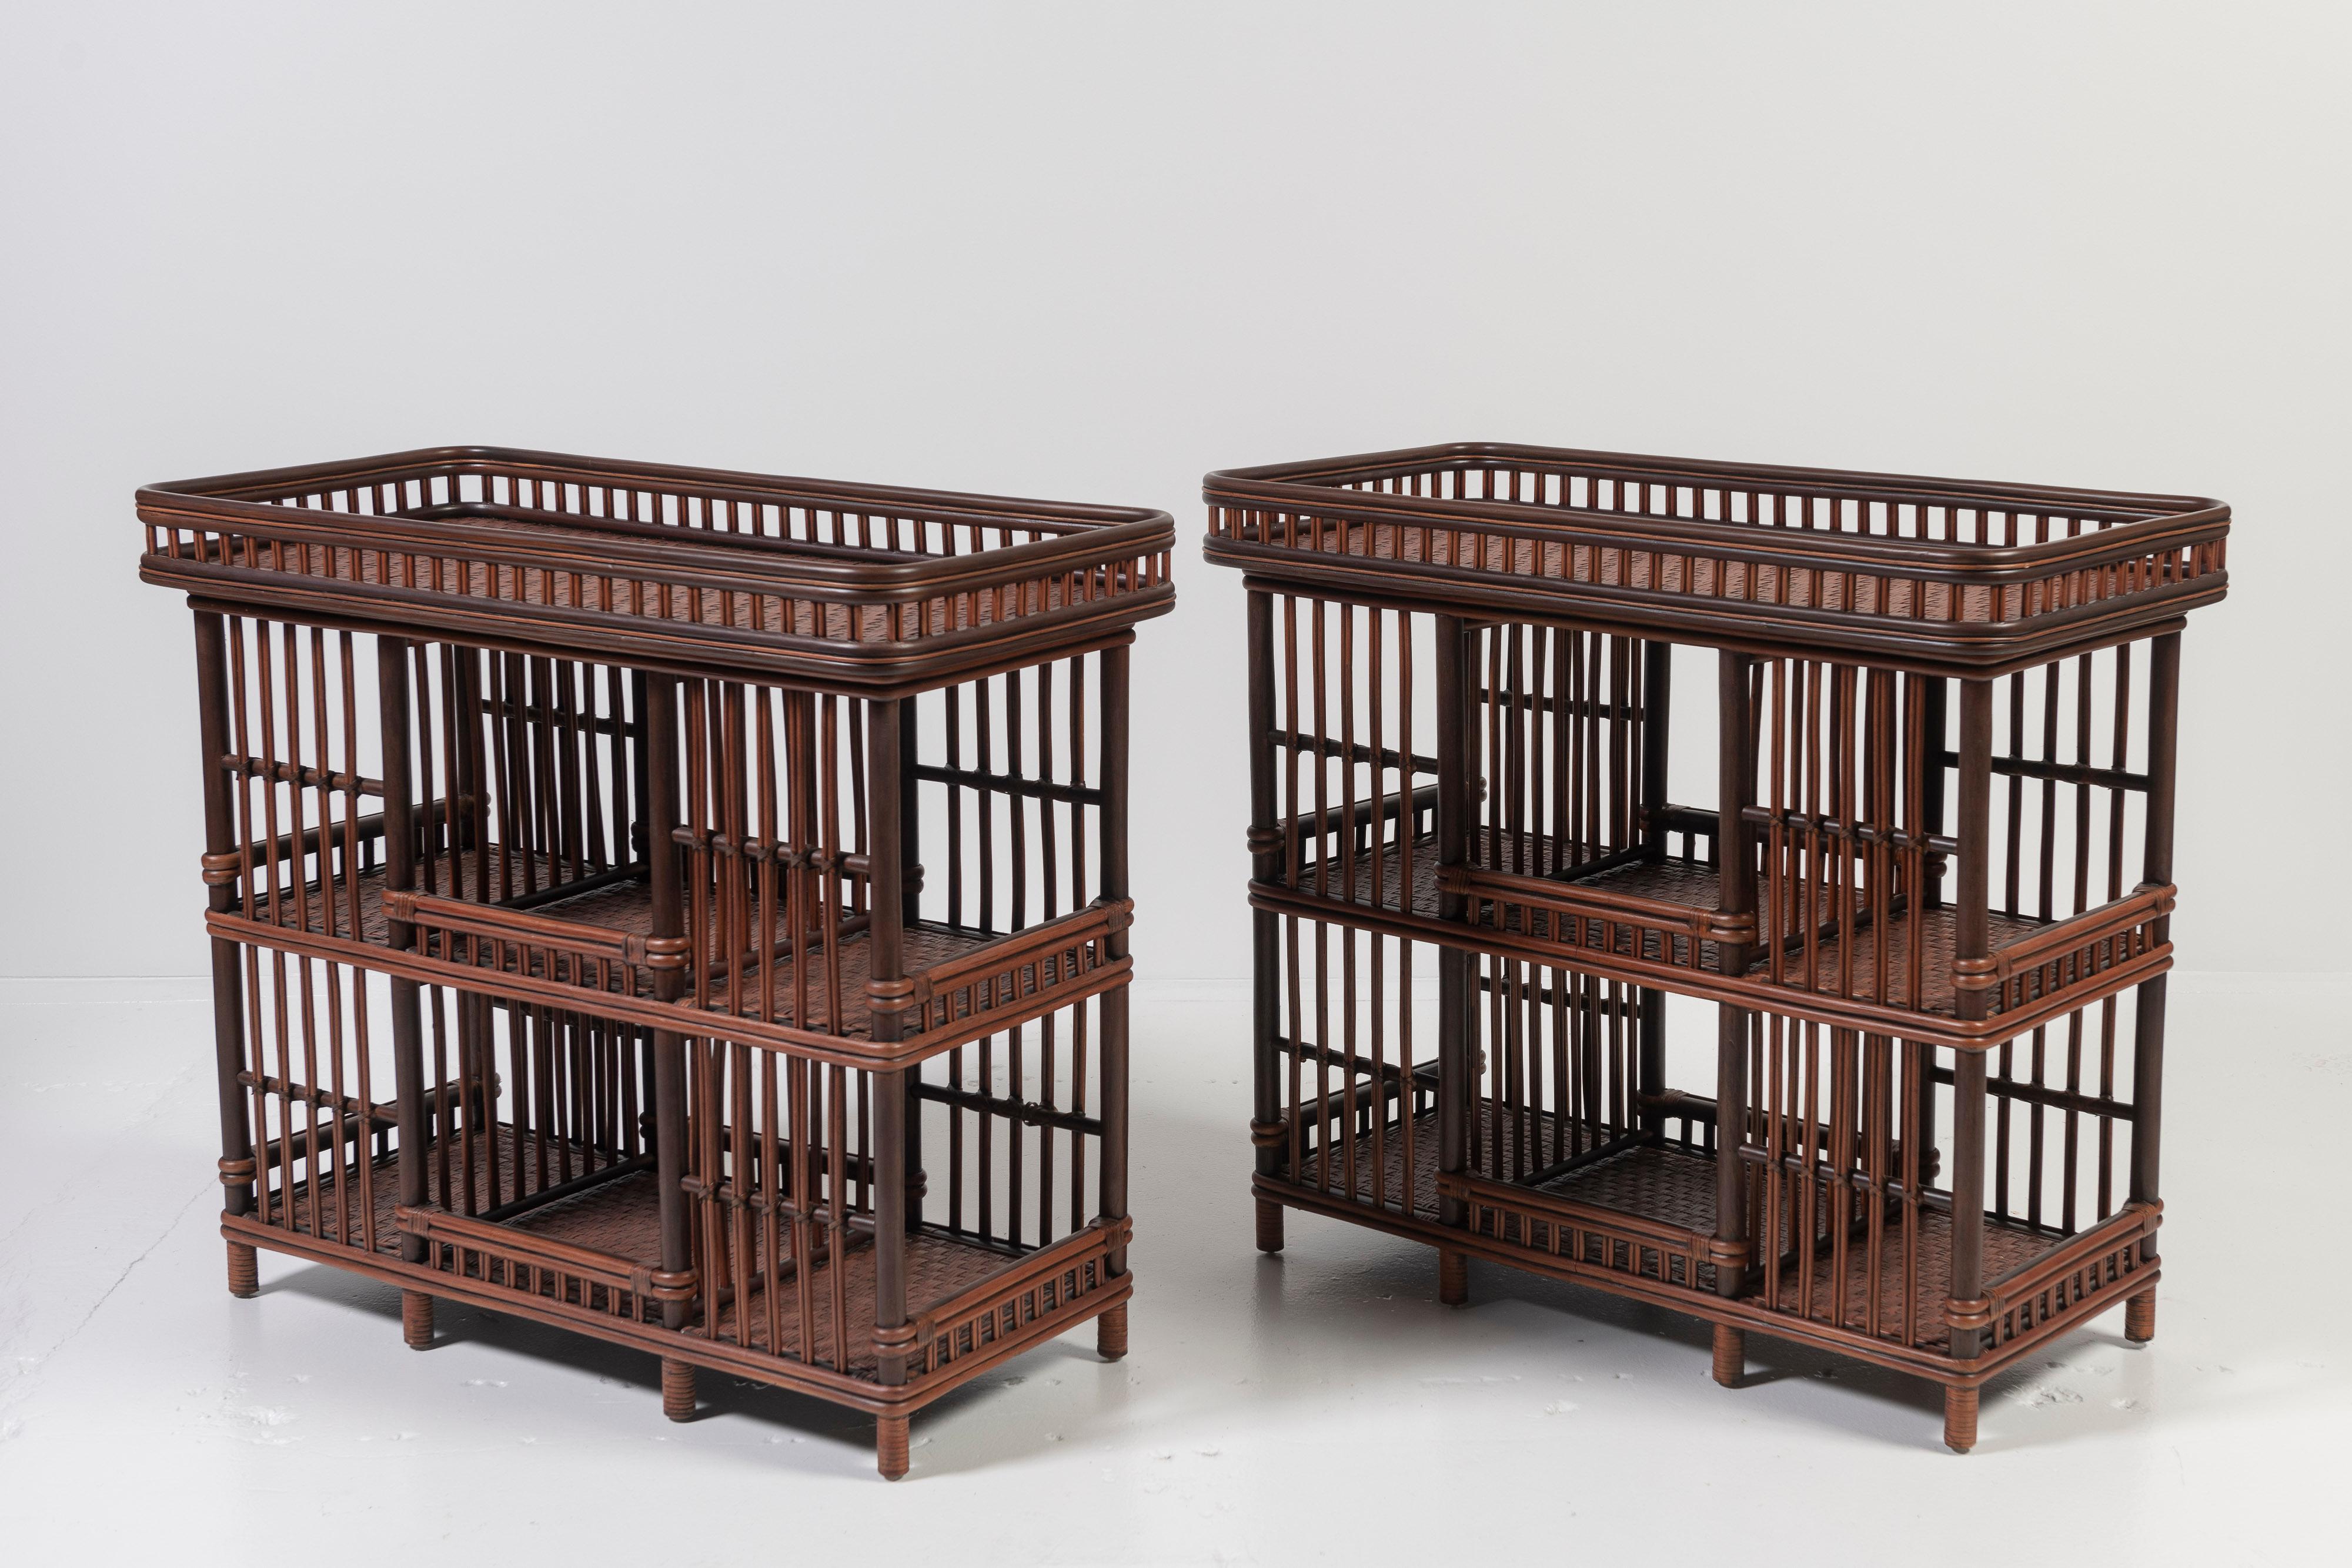 These two wicker cabinets are in very good condition, can be utilized in a variety of ways and are perfect for today's style makers. The pieces are framed in whole-core woven rattan, are counter height and have shelves for storage below. Stock as a